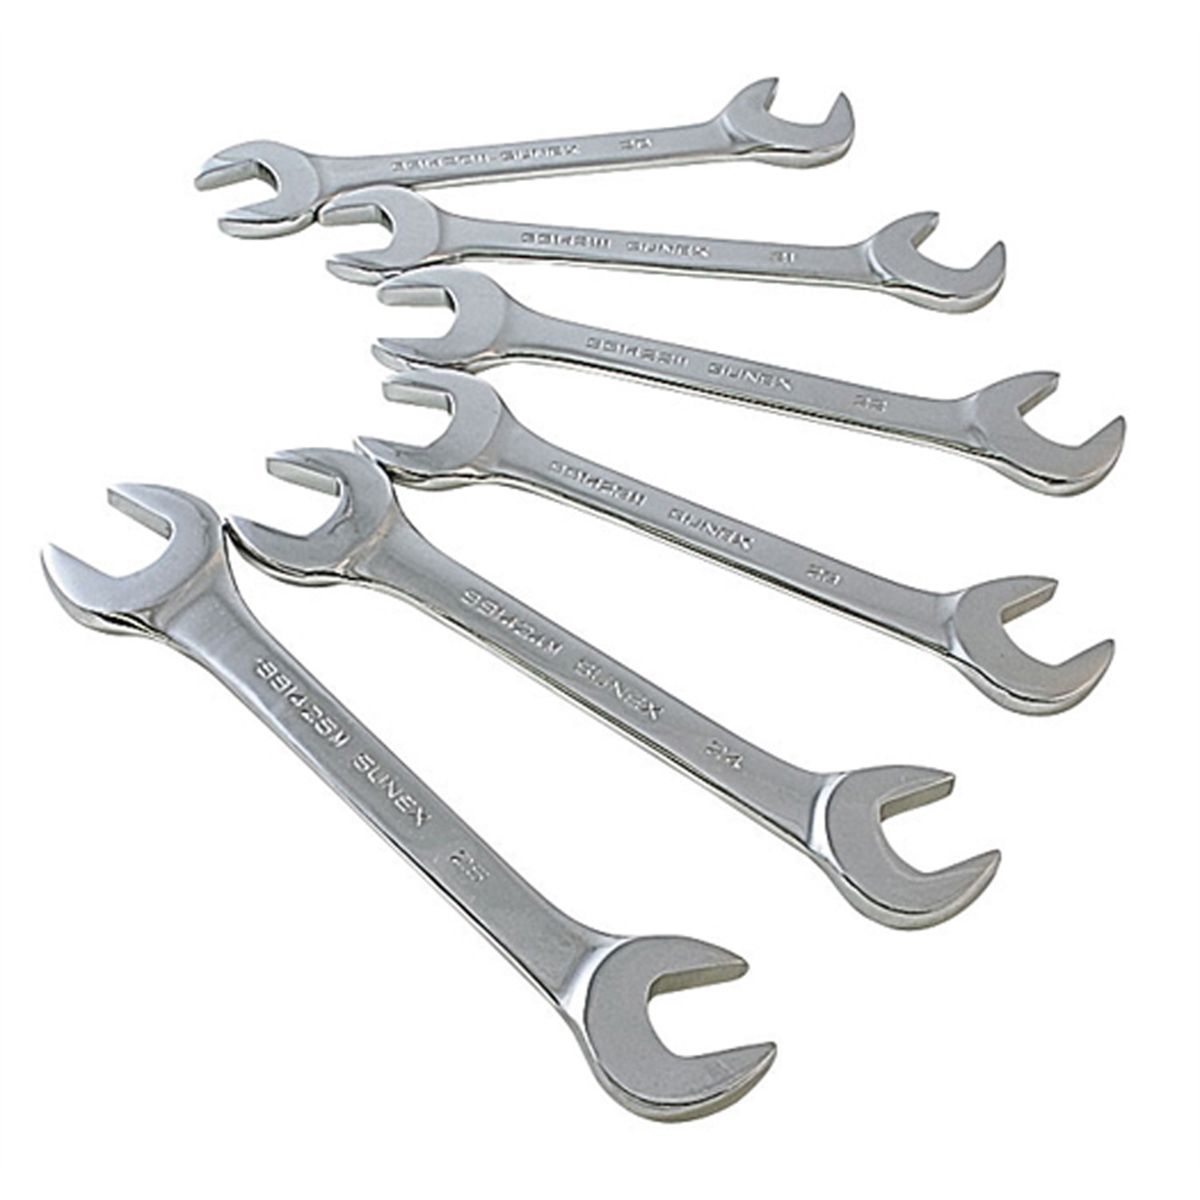 Metric Angled Wrench Set - 6-Pc